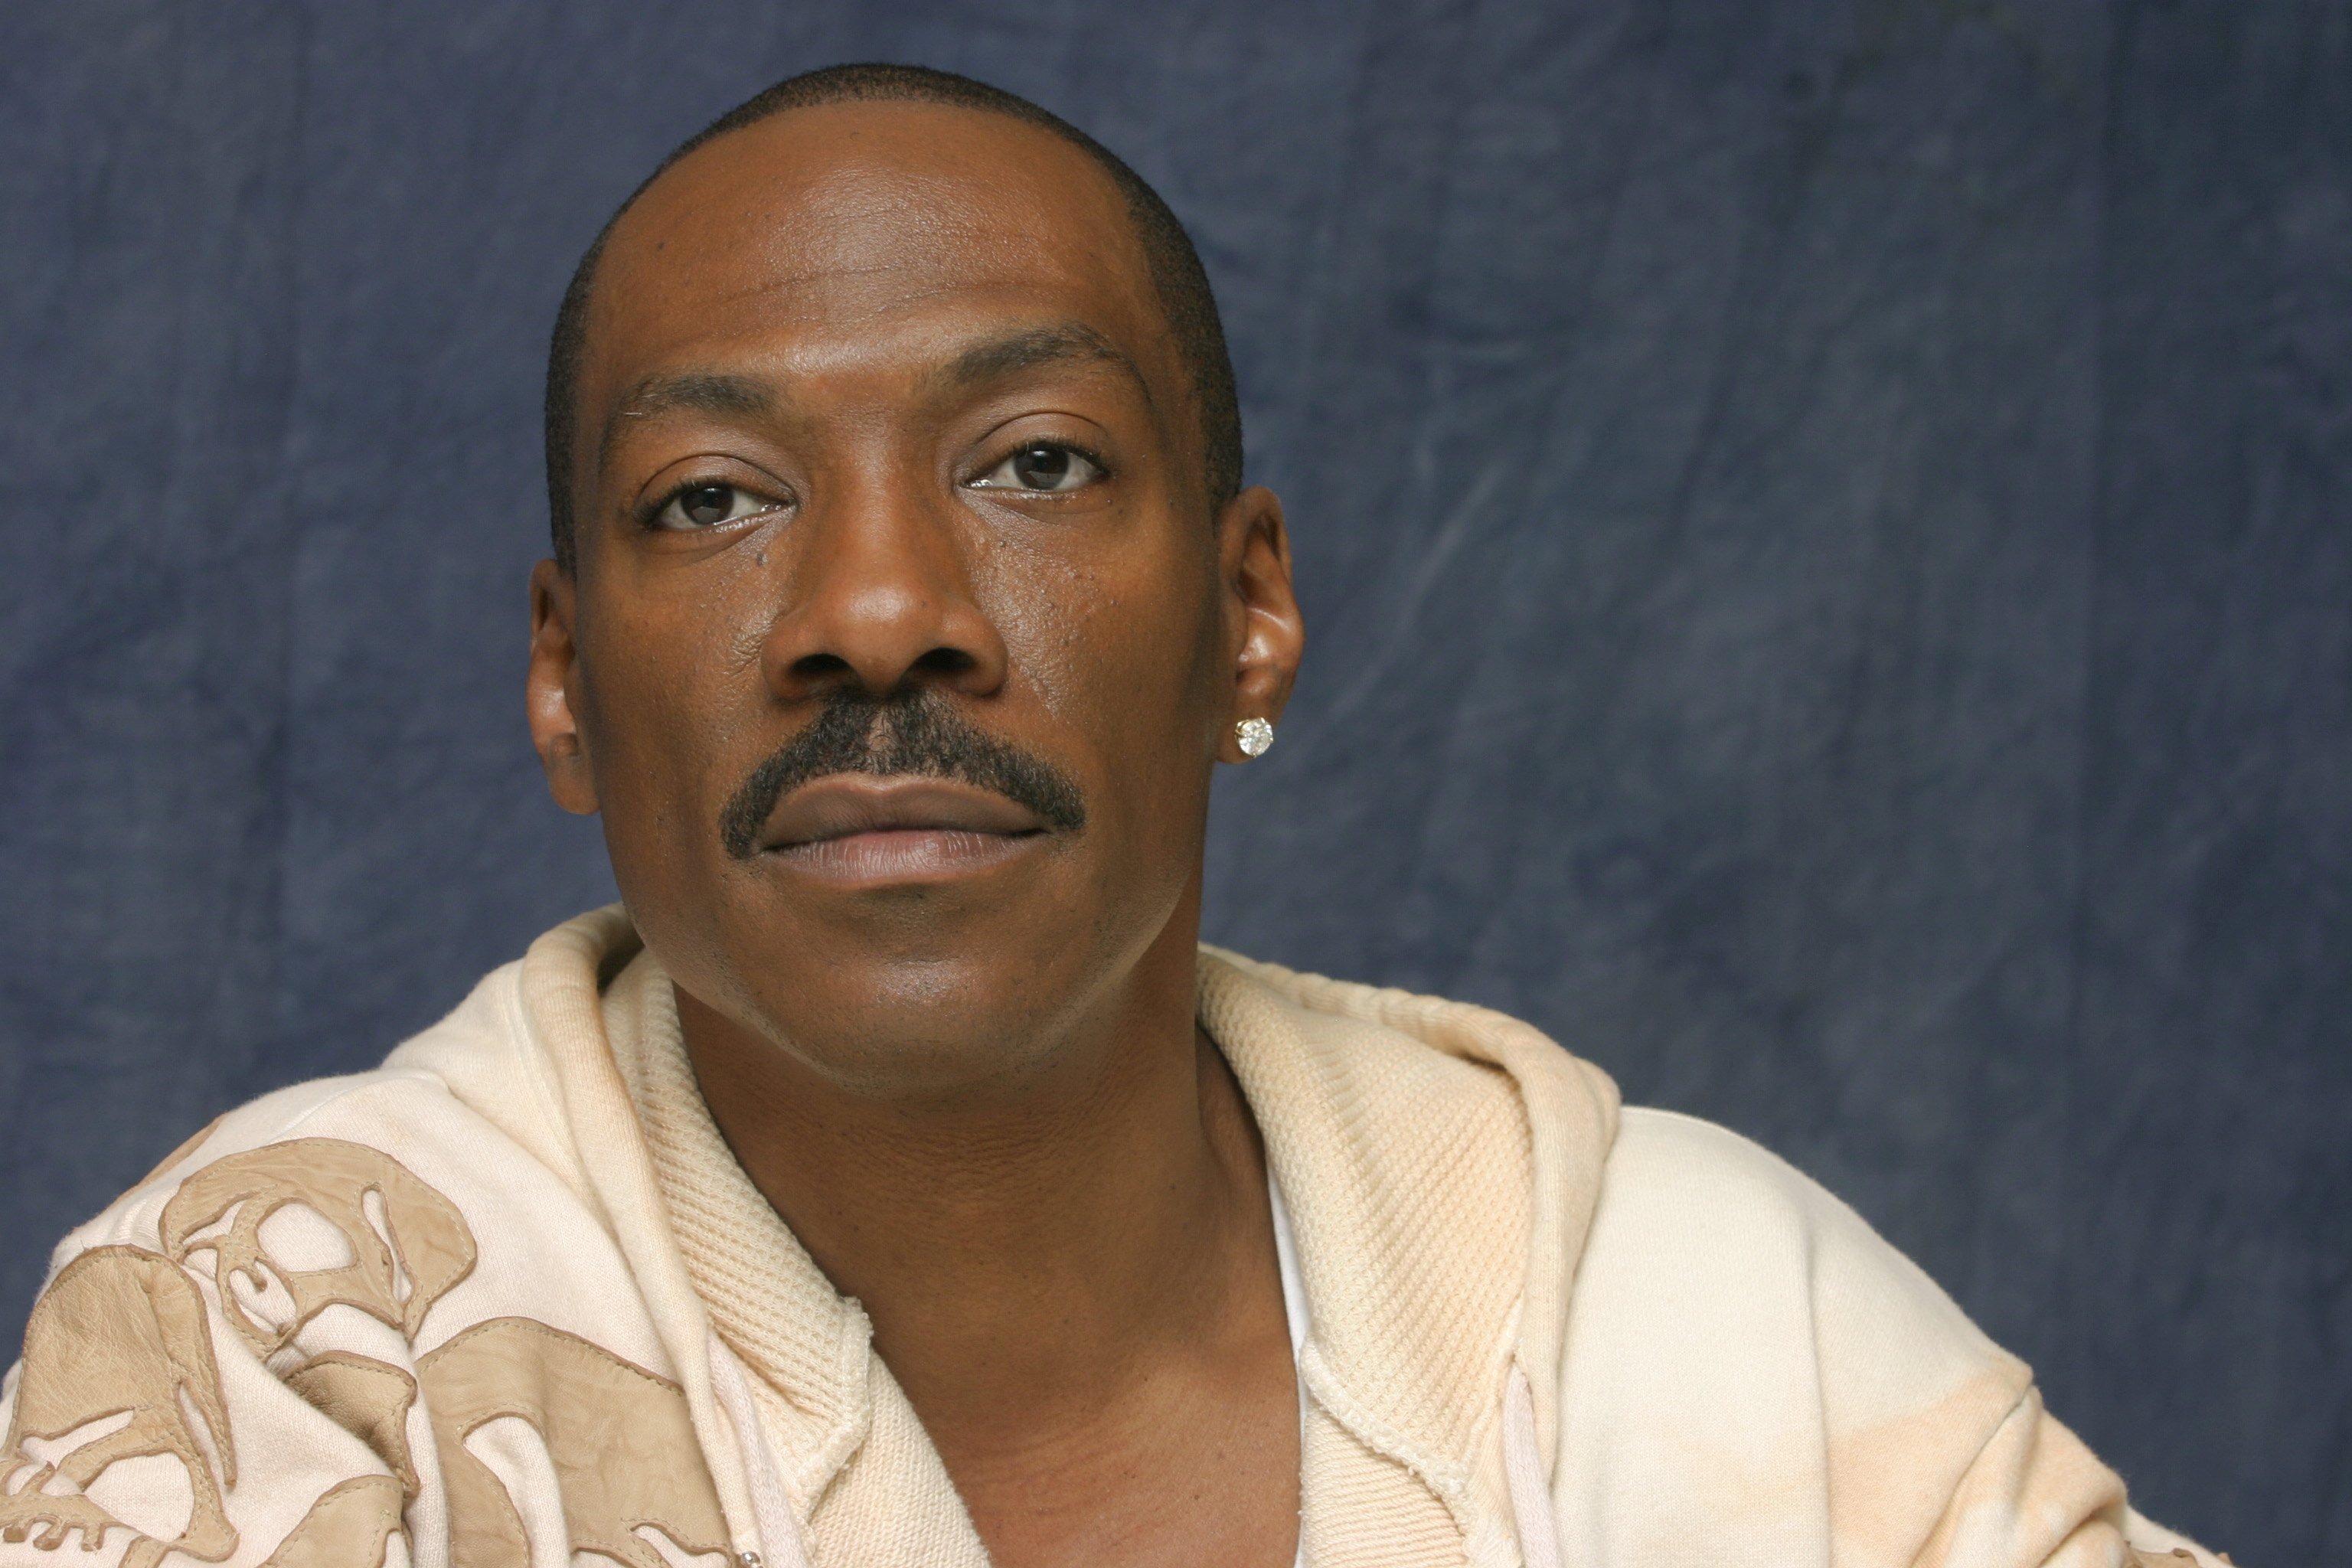 Eddie Murphy during a portrait session on May 6, 2007. | Photo: Getty Images